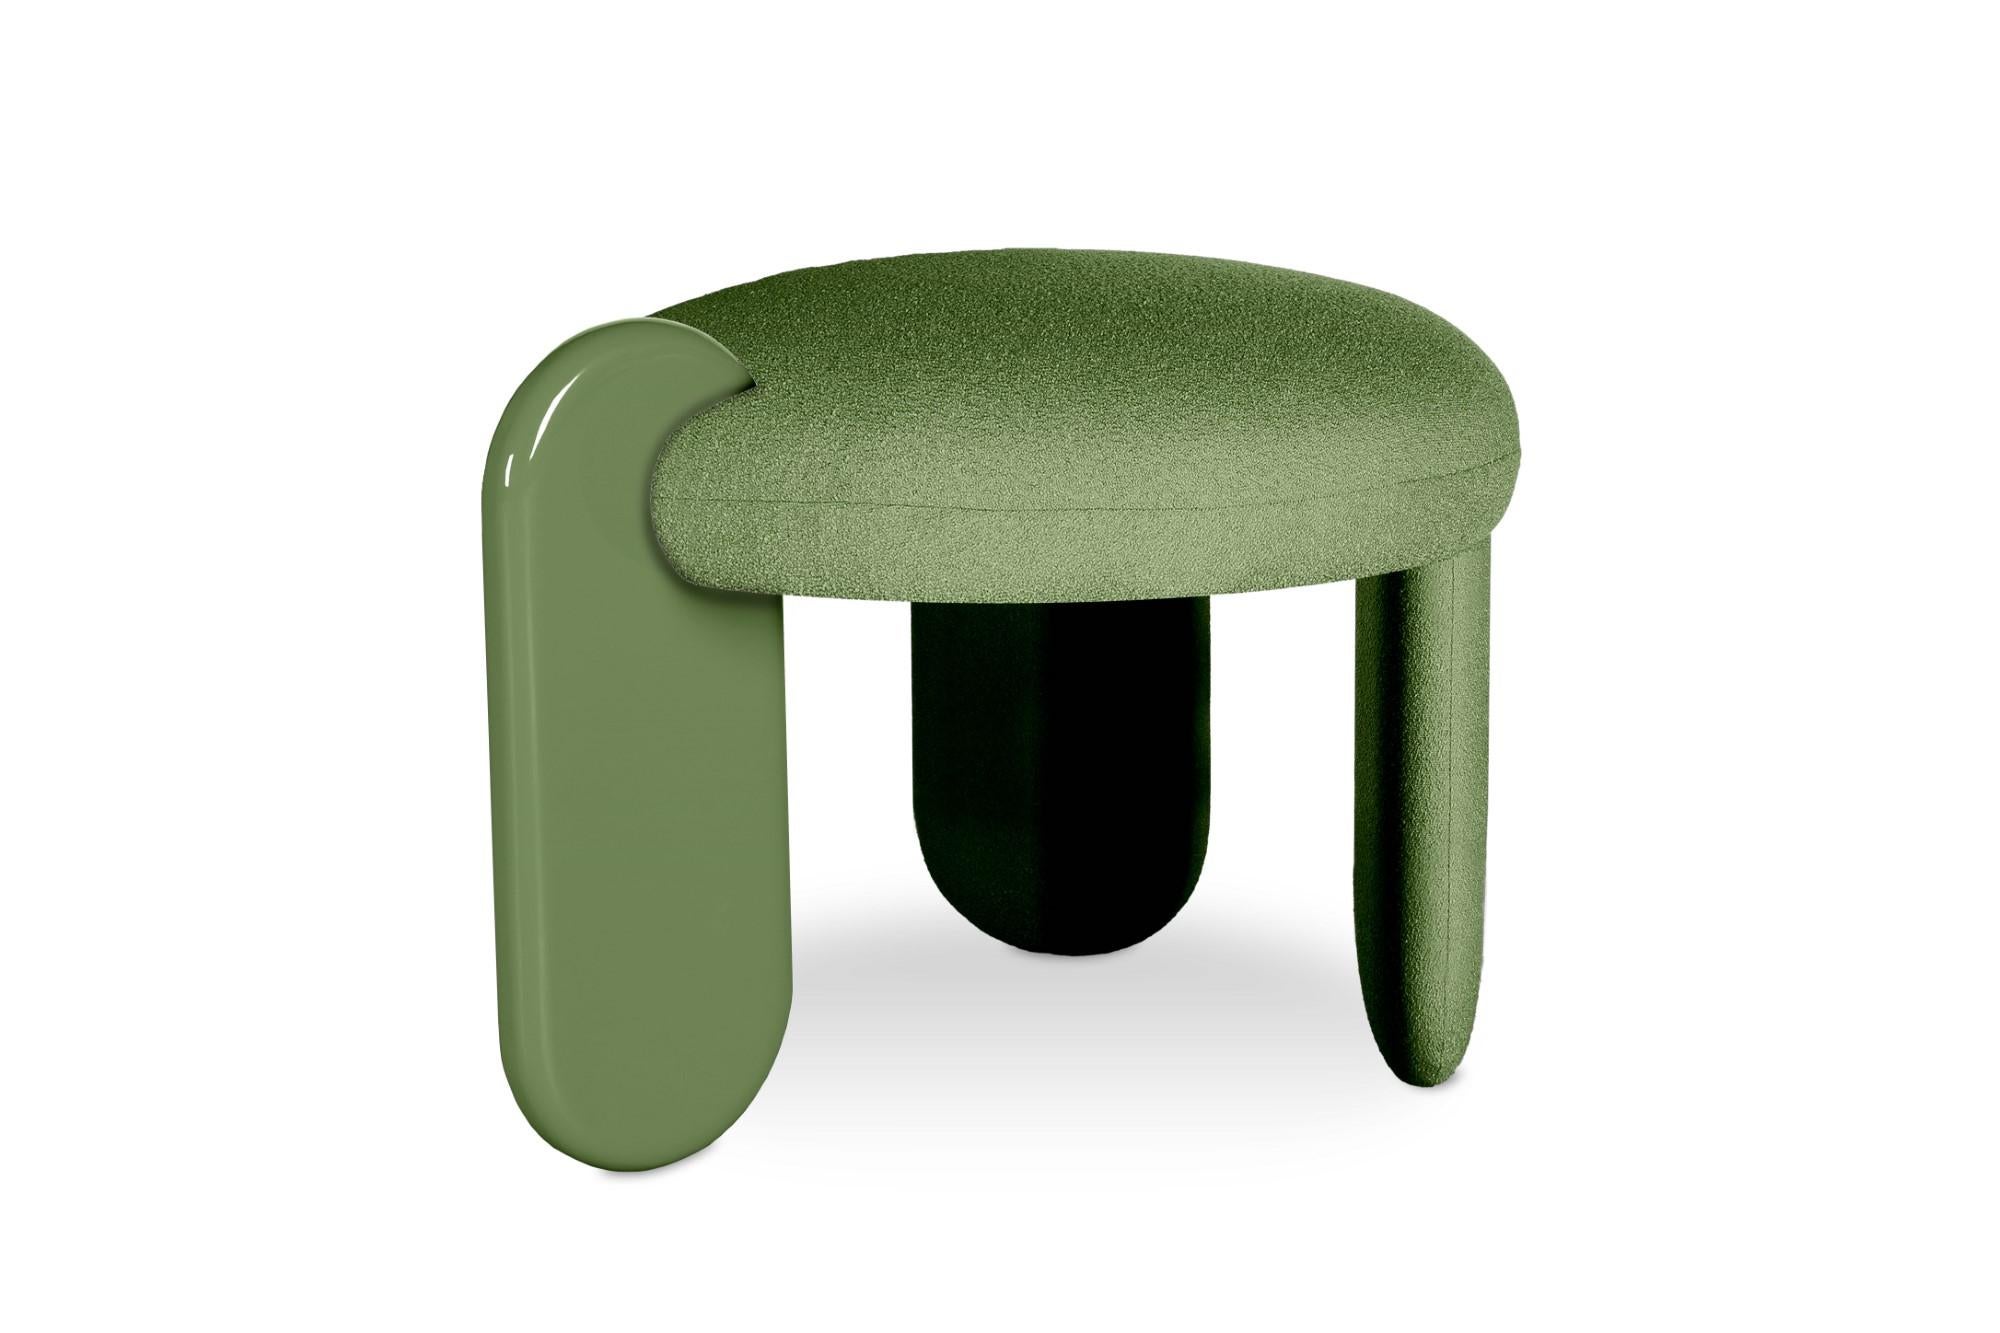 Glazy stool by Royal Stranger
Dimensions: width 68.5cm, height 50cm, depth 60cm
Materials: Solid wood frame, foam, upholstery.
Amande color from the Fabrics Main Collection LAGO.
Also available in other leg colors, Royal Stranger’s fabrics and